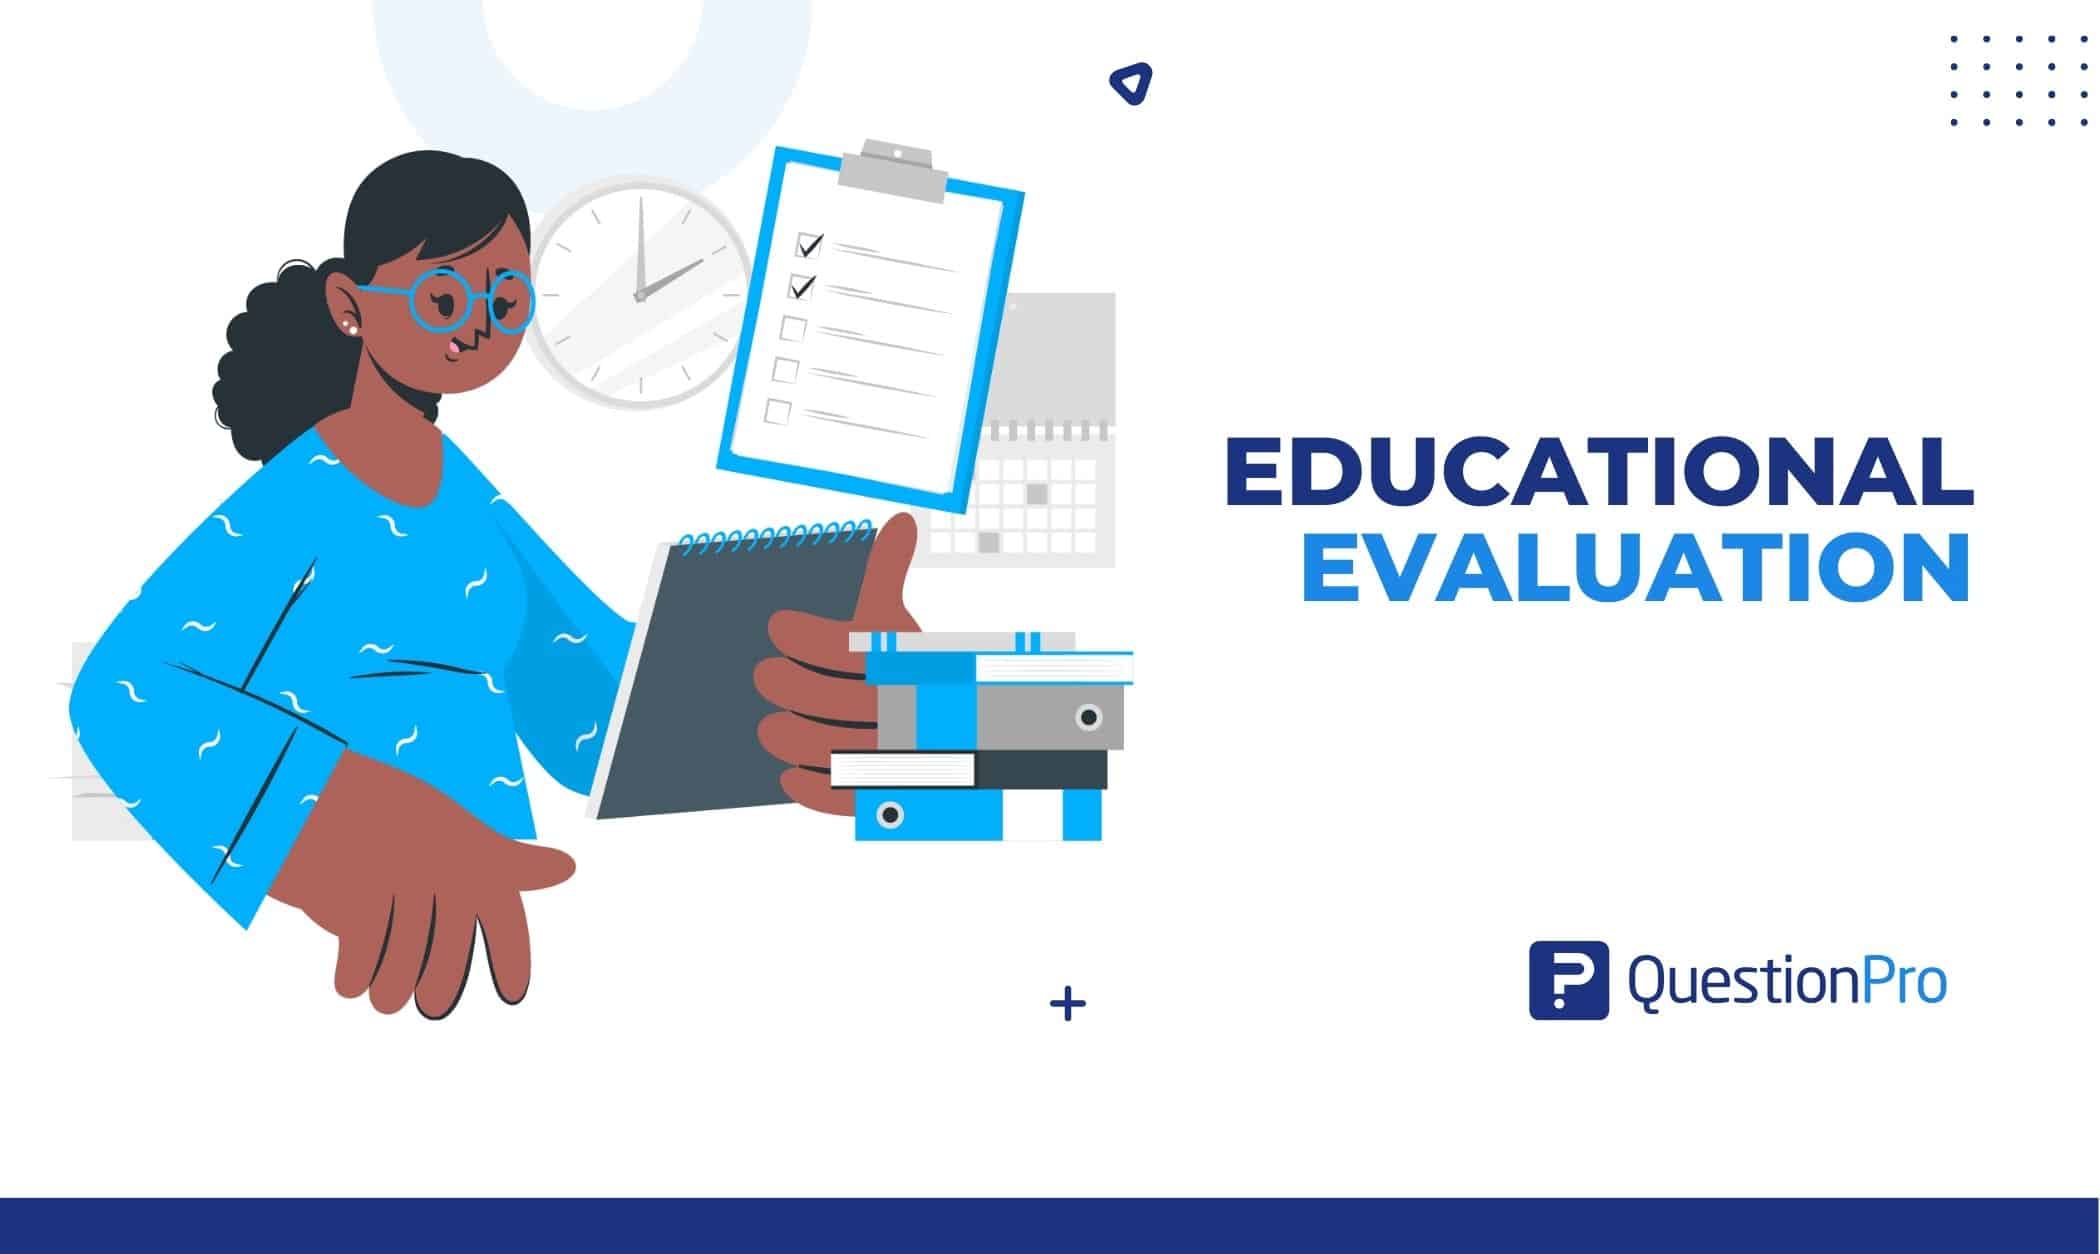 An educational evaluation may be based on the professional judgment of the people doing it. Find out about it, its importance & principles.